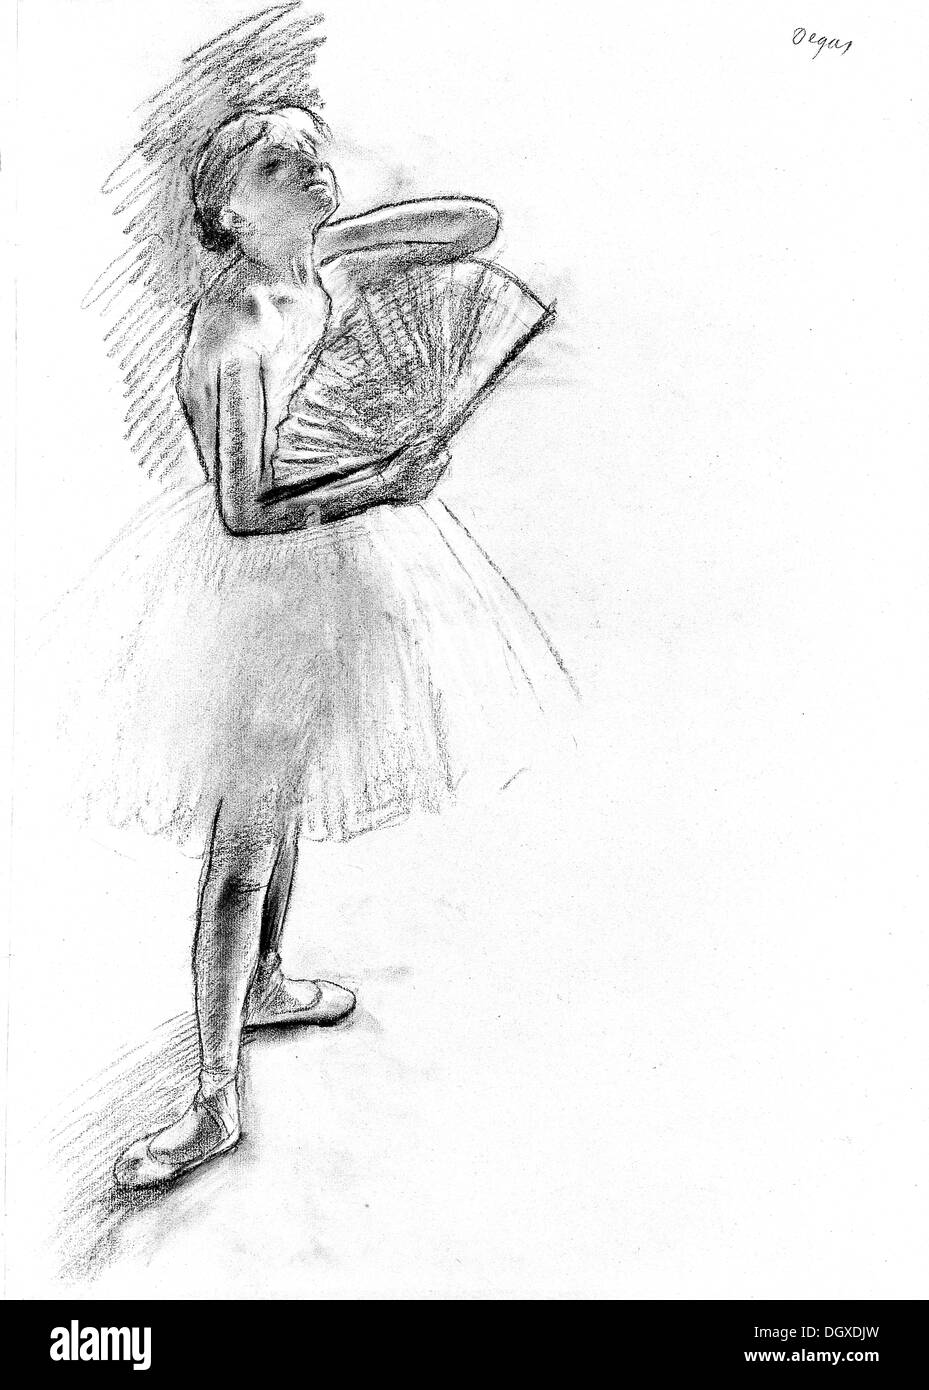 Dancer with a Fan - by Edgar Degas, 1880 Stock Photo